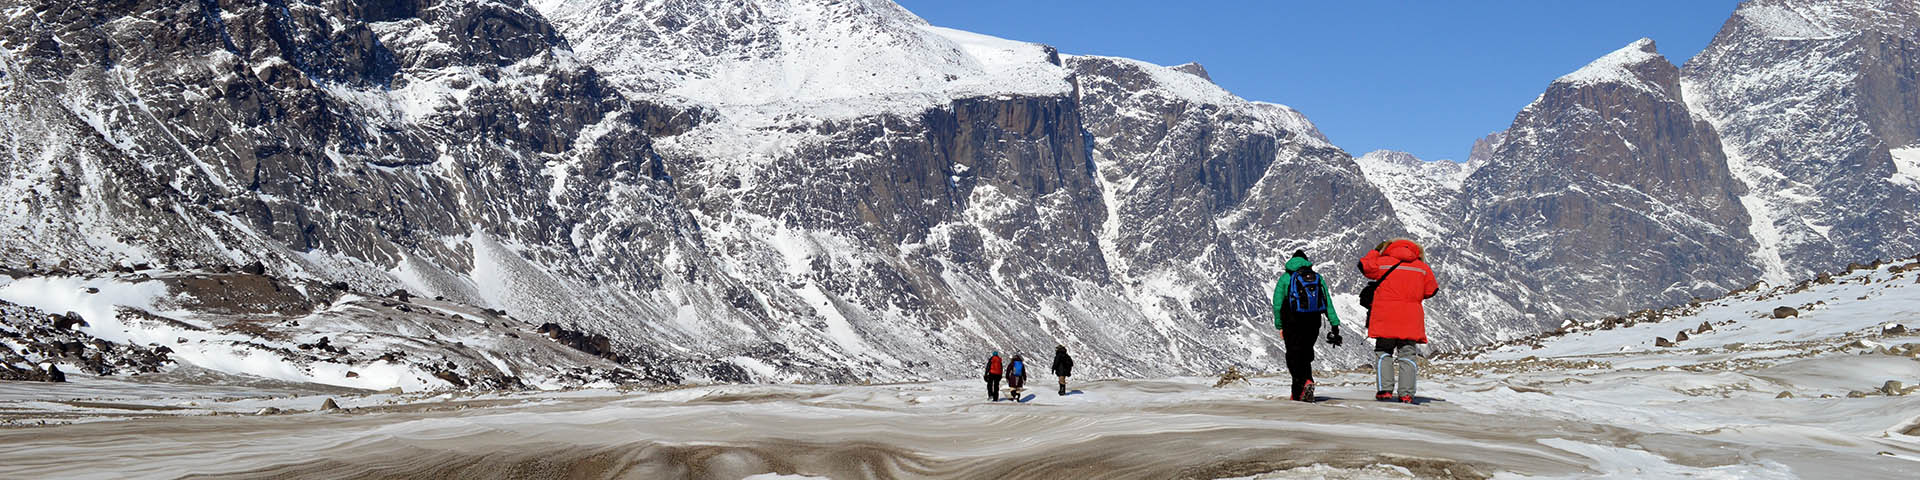 A group of people walking through a snowy mountainous landscape. 